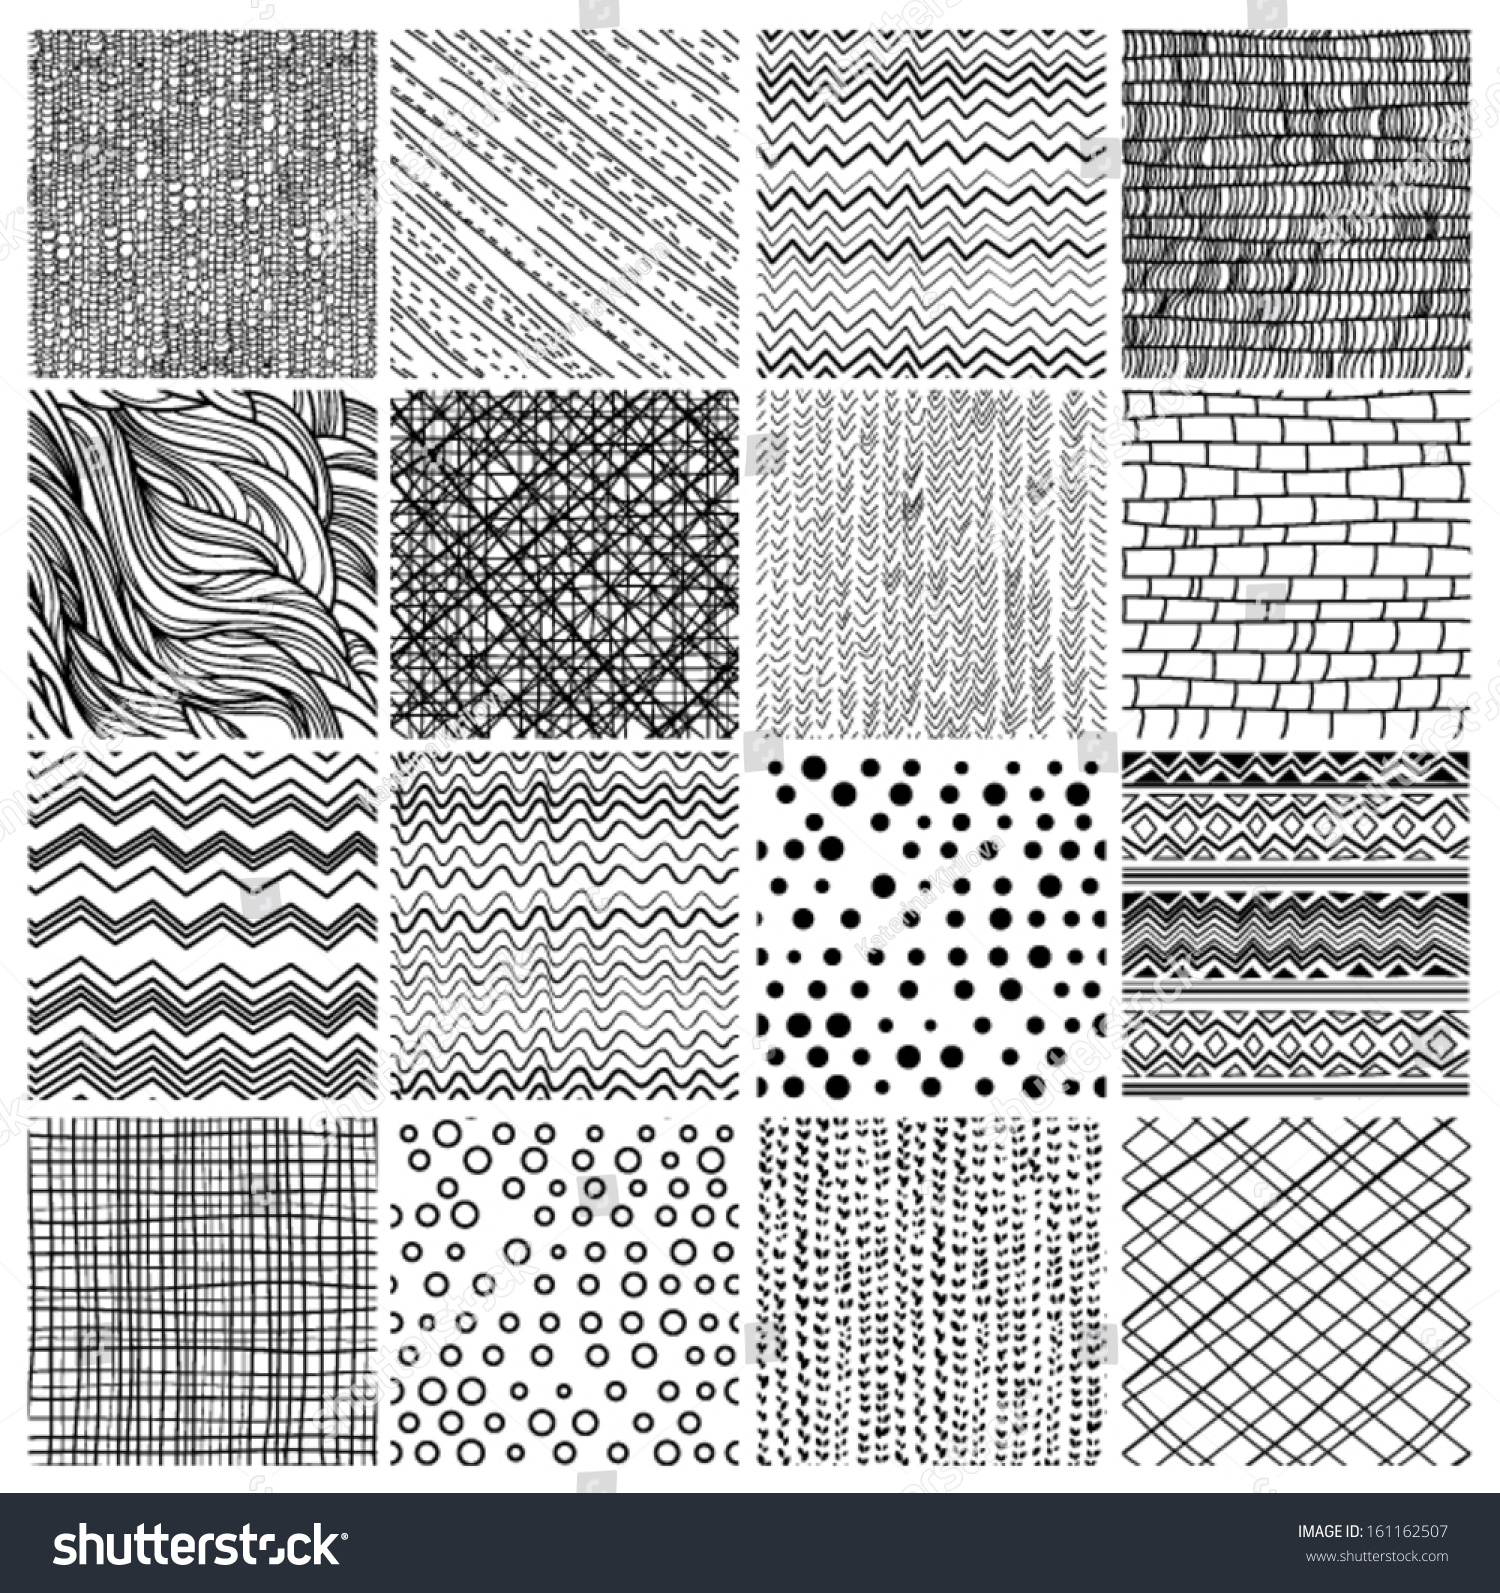 Set Of 16 Geometric Patterns And Textures- Zig Zag, Dots, Textile ...